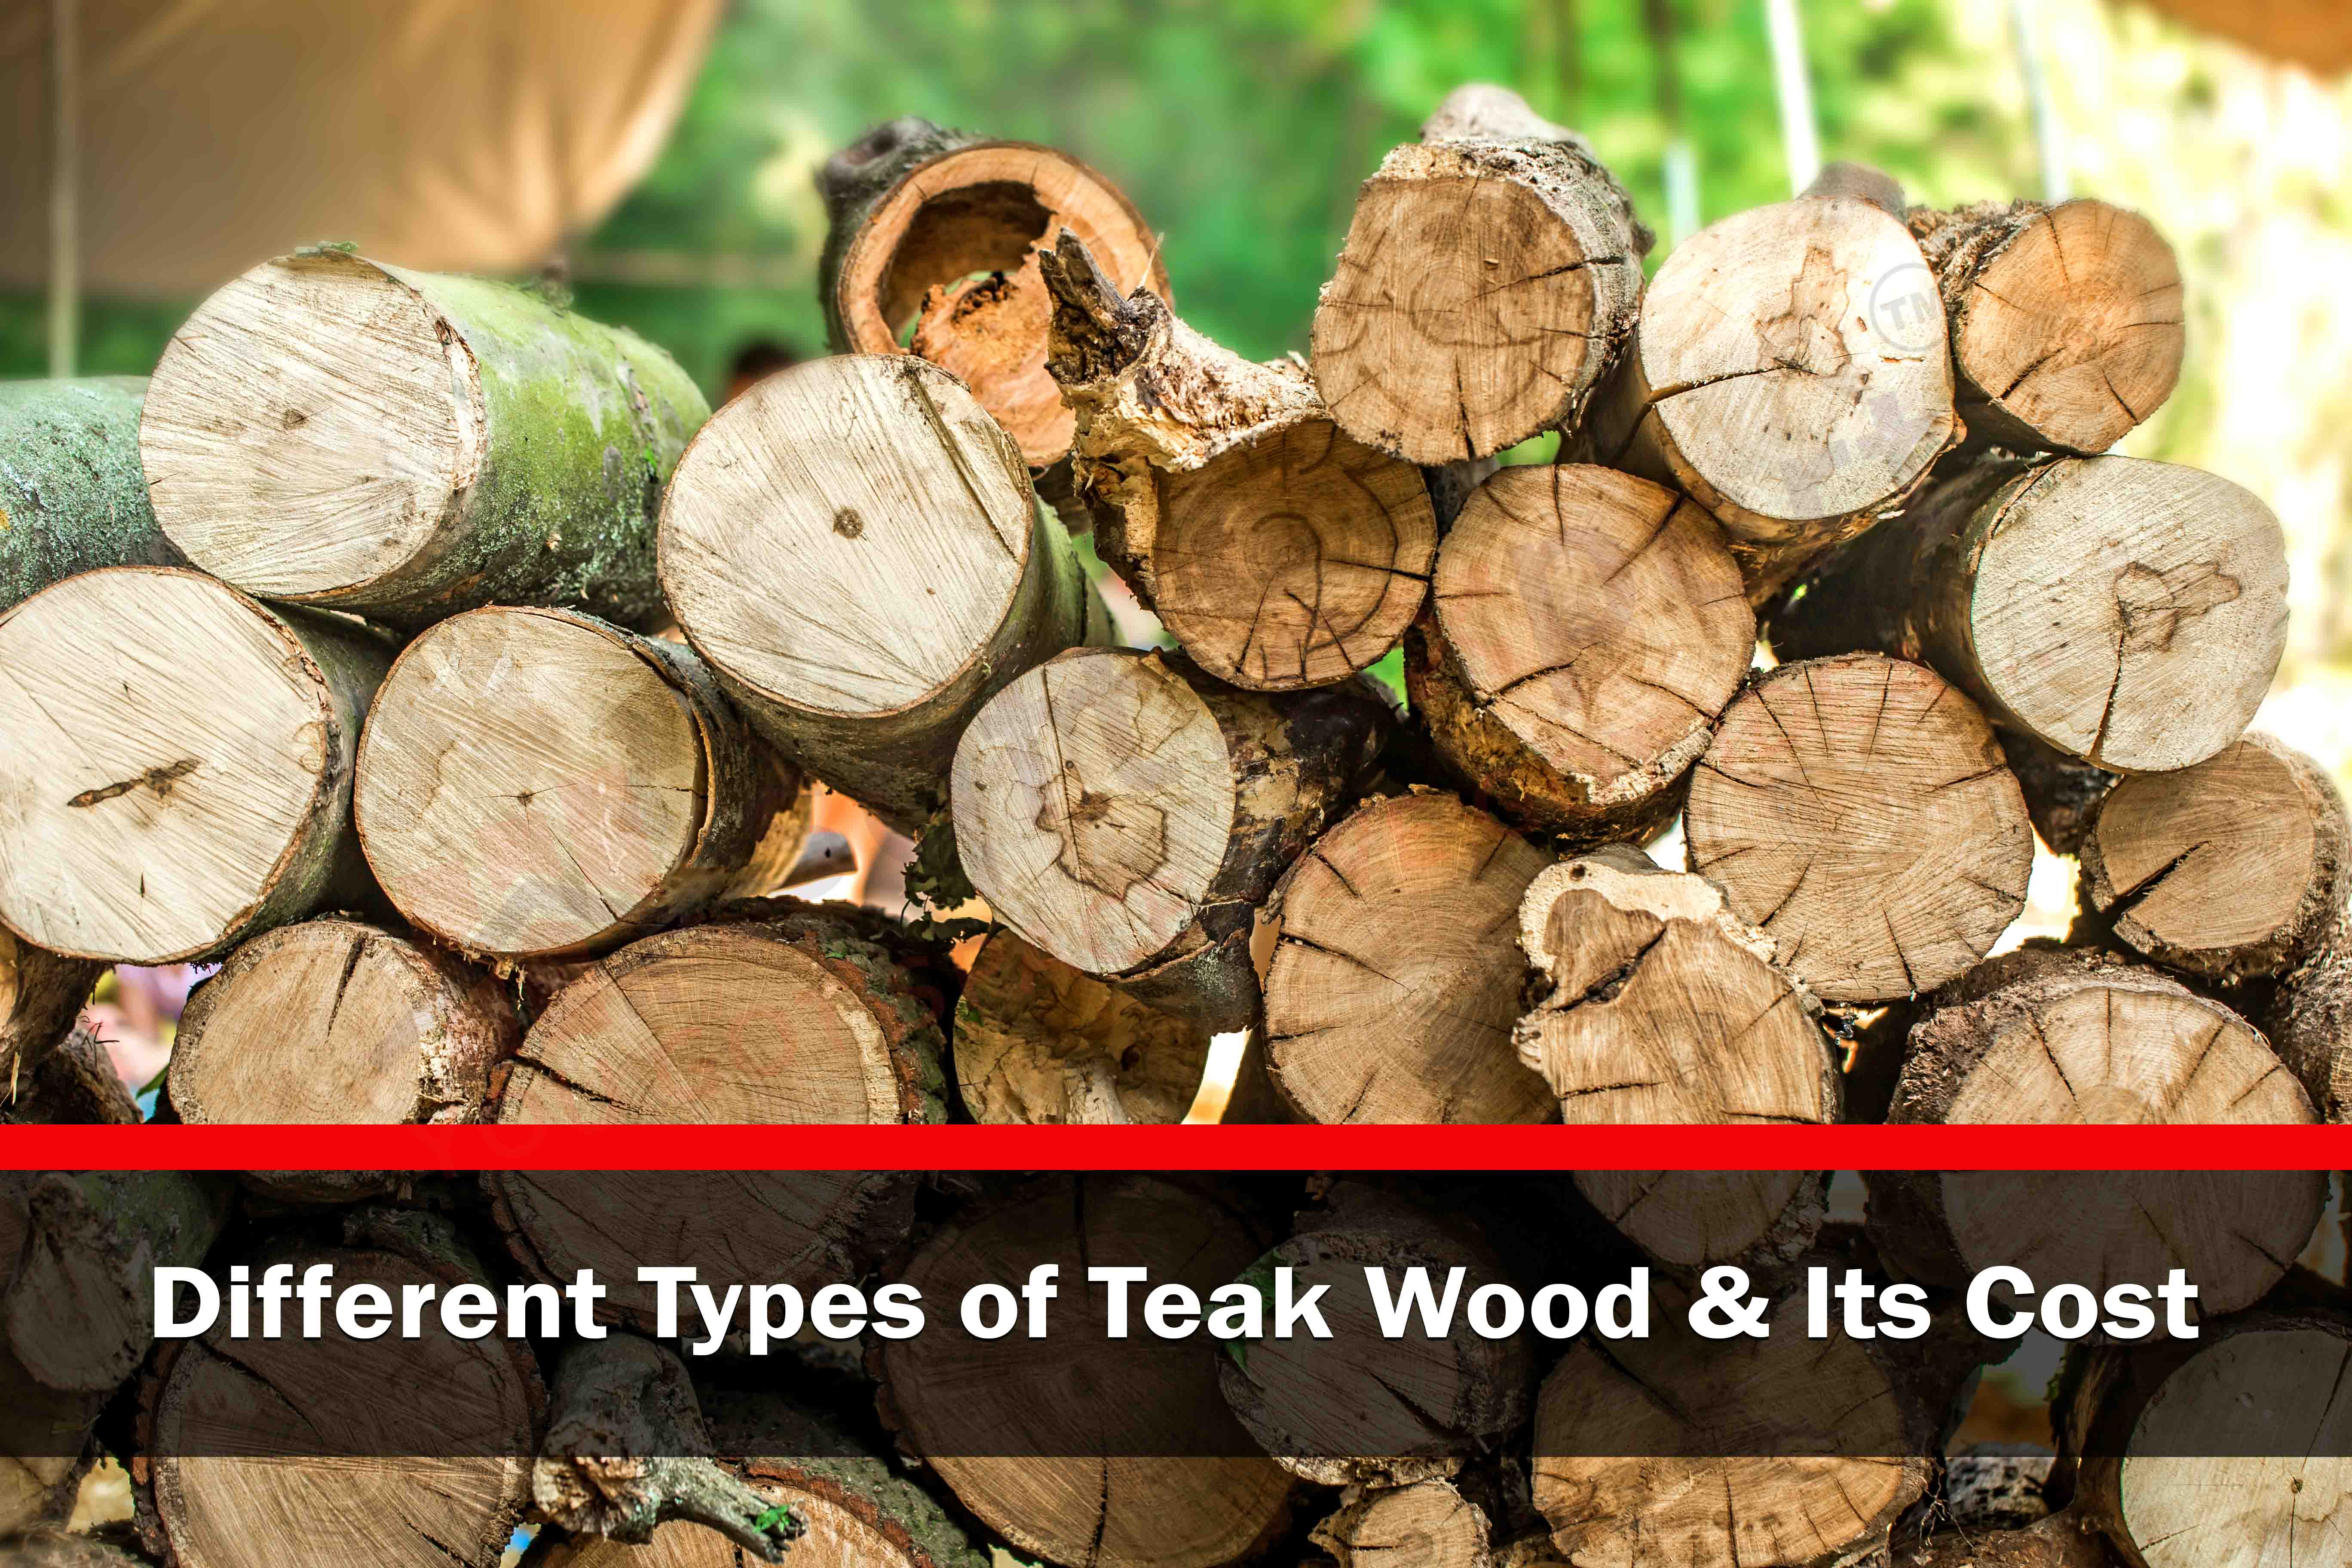 Different Types of Teak Wood & Its Cost